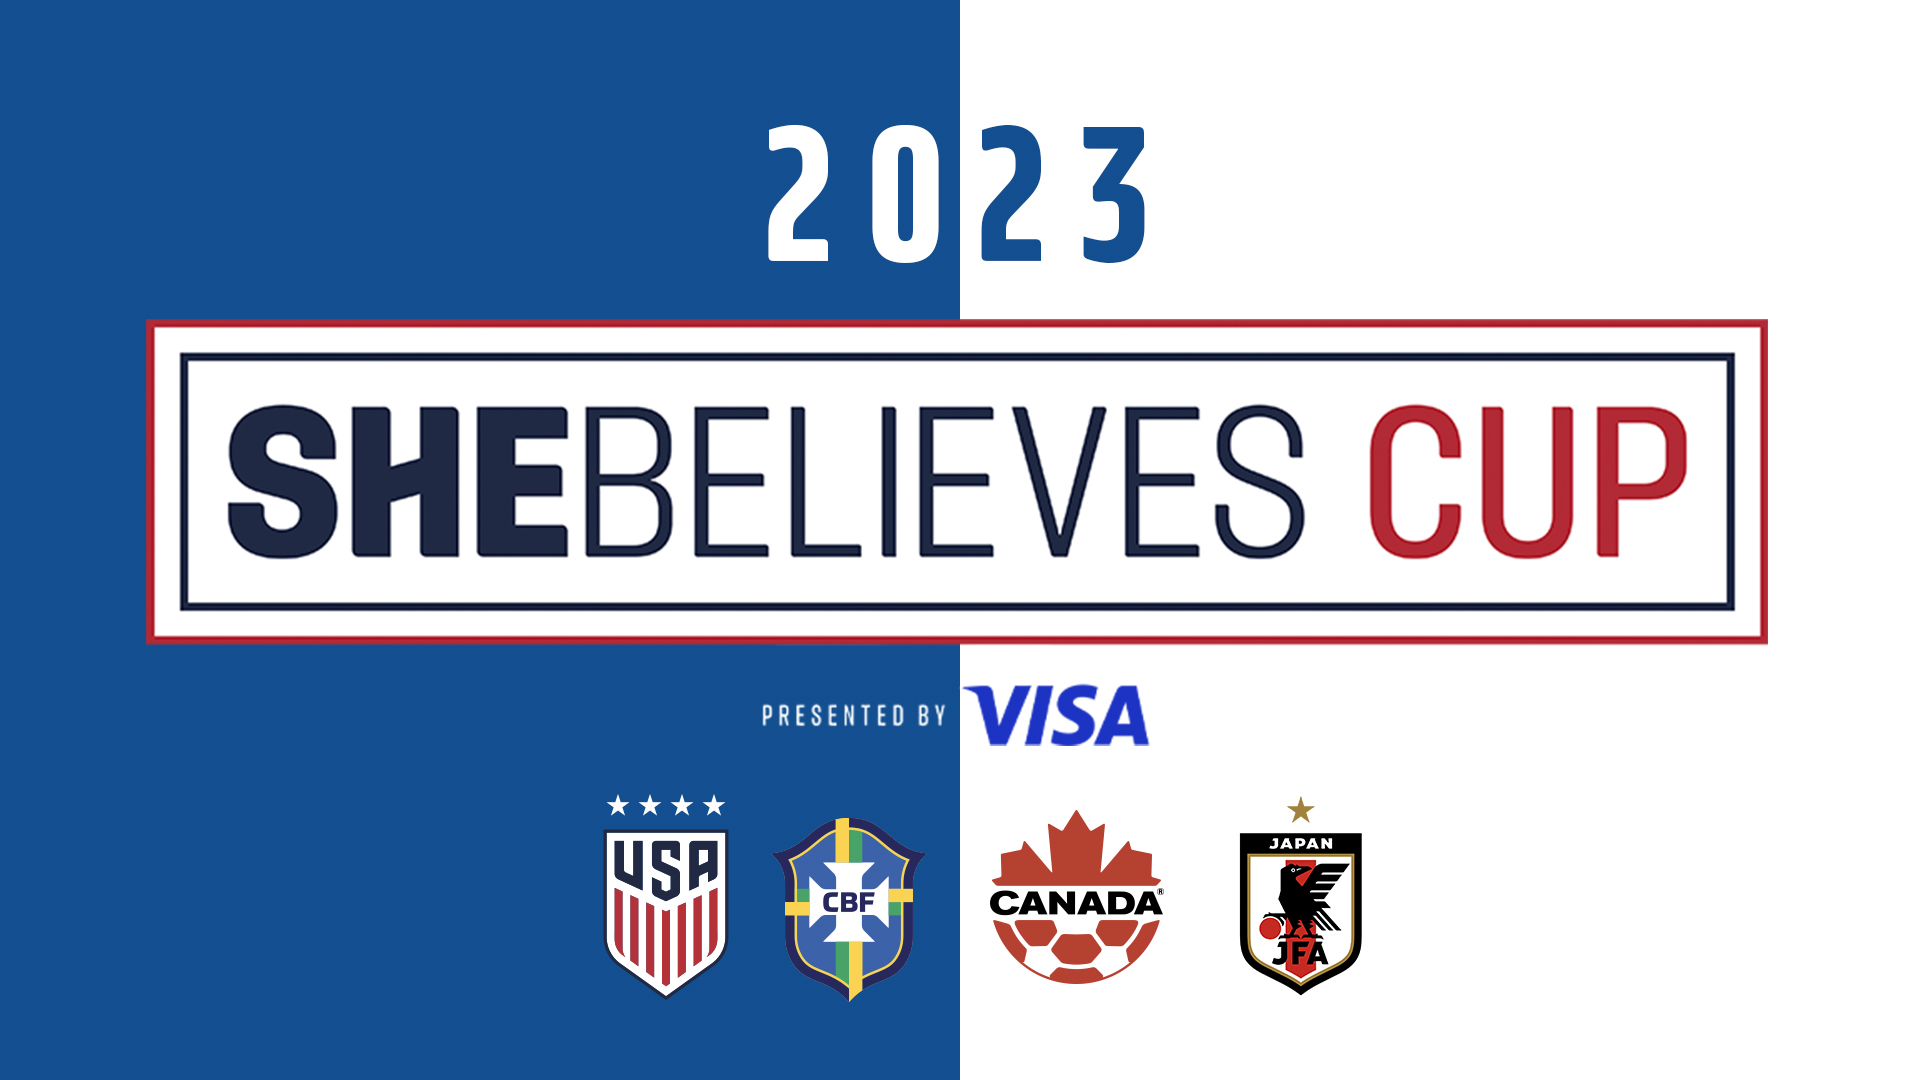 2023-shebelieves-cup-presented-by-visa-will-feature-the-usa-hosting